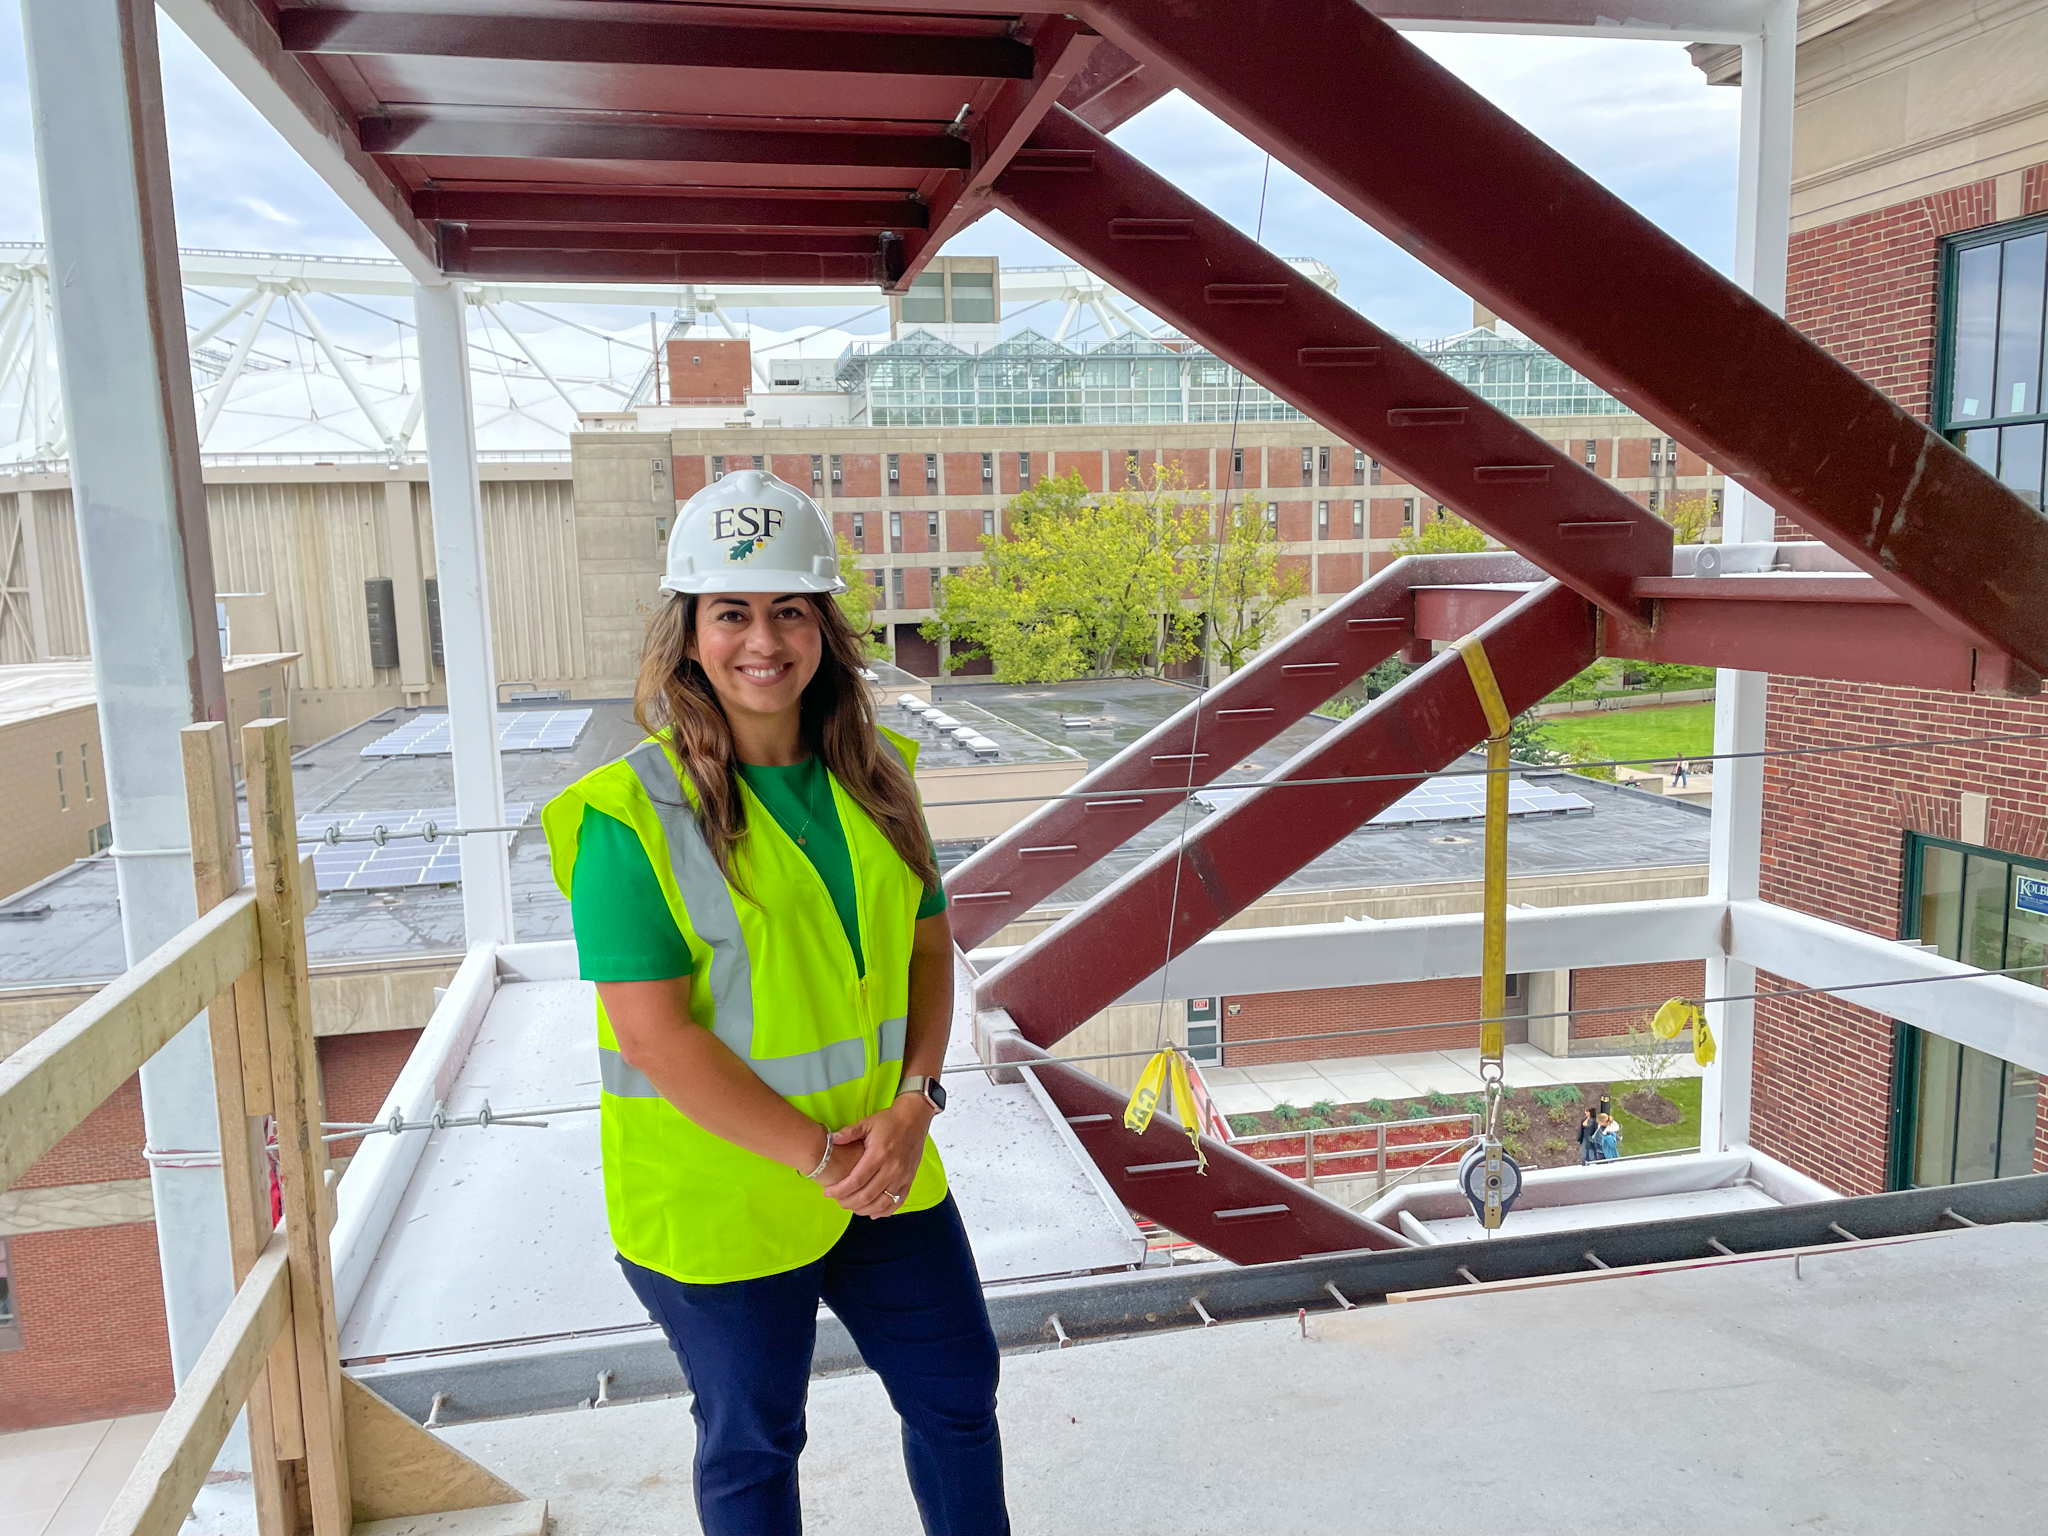 Diana Jaramillo wearing a white E S F hard hat and green jacket standing in Marshall Hall